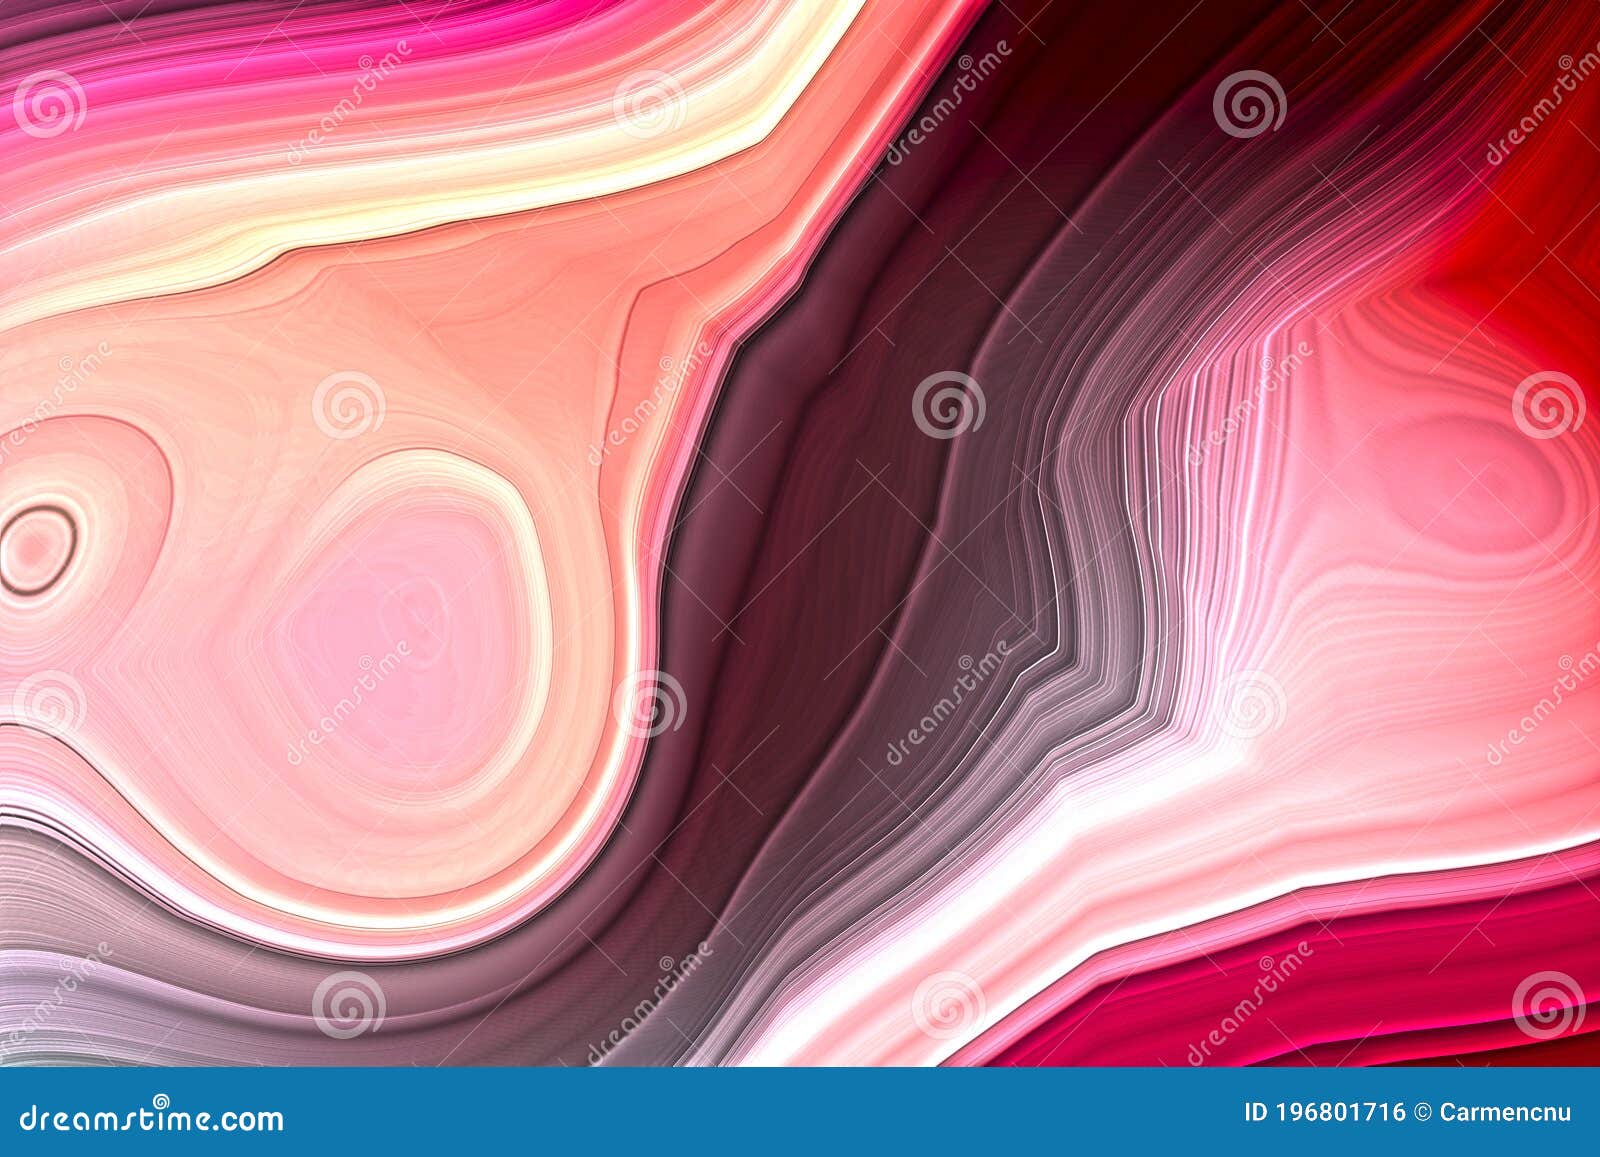 magic abstract with curved lines imitating rock surface. planet jupiter